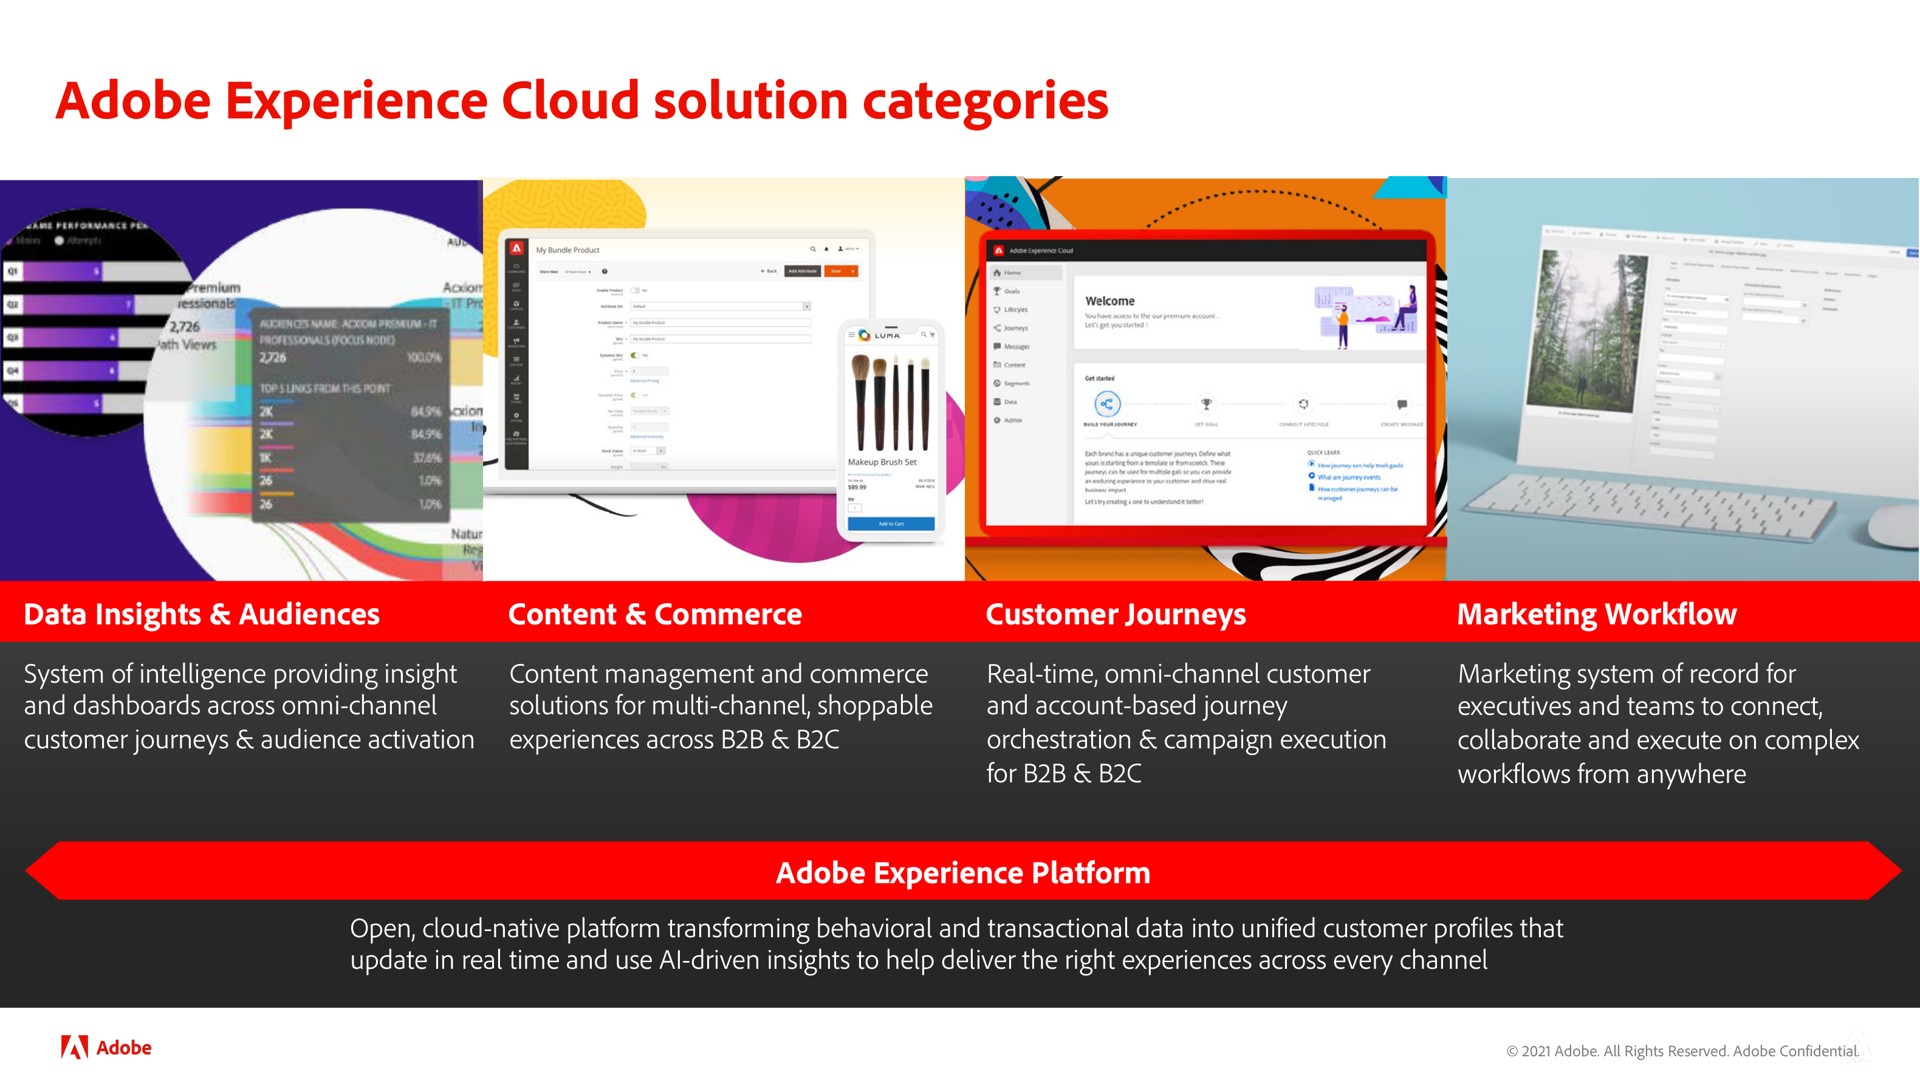 adobe experience cloud solution categories | Adobe